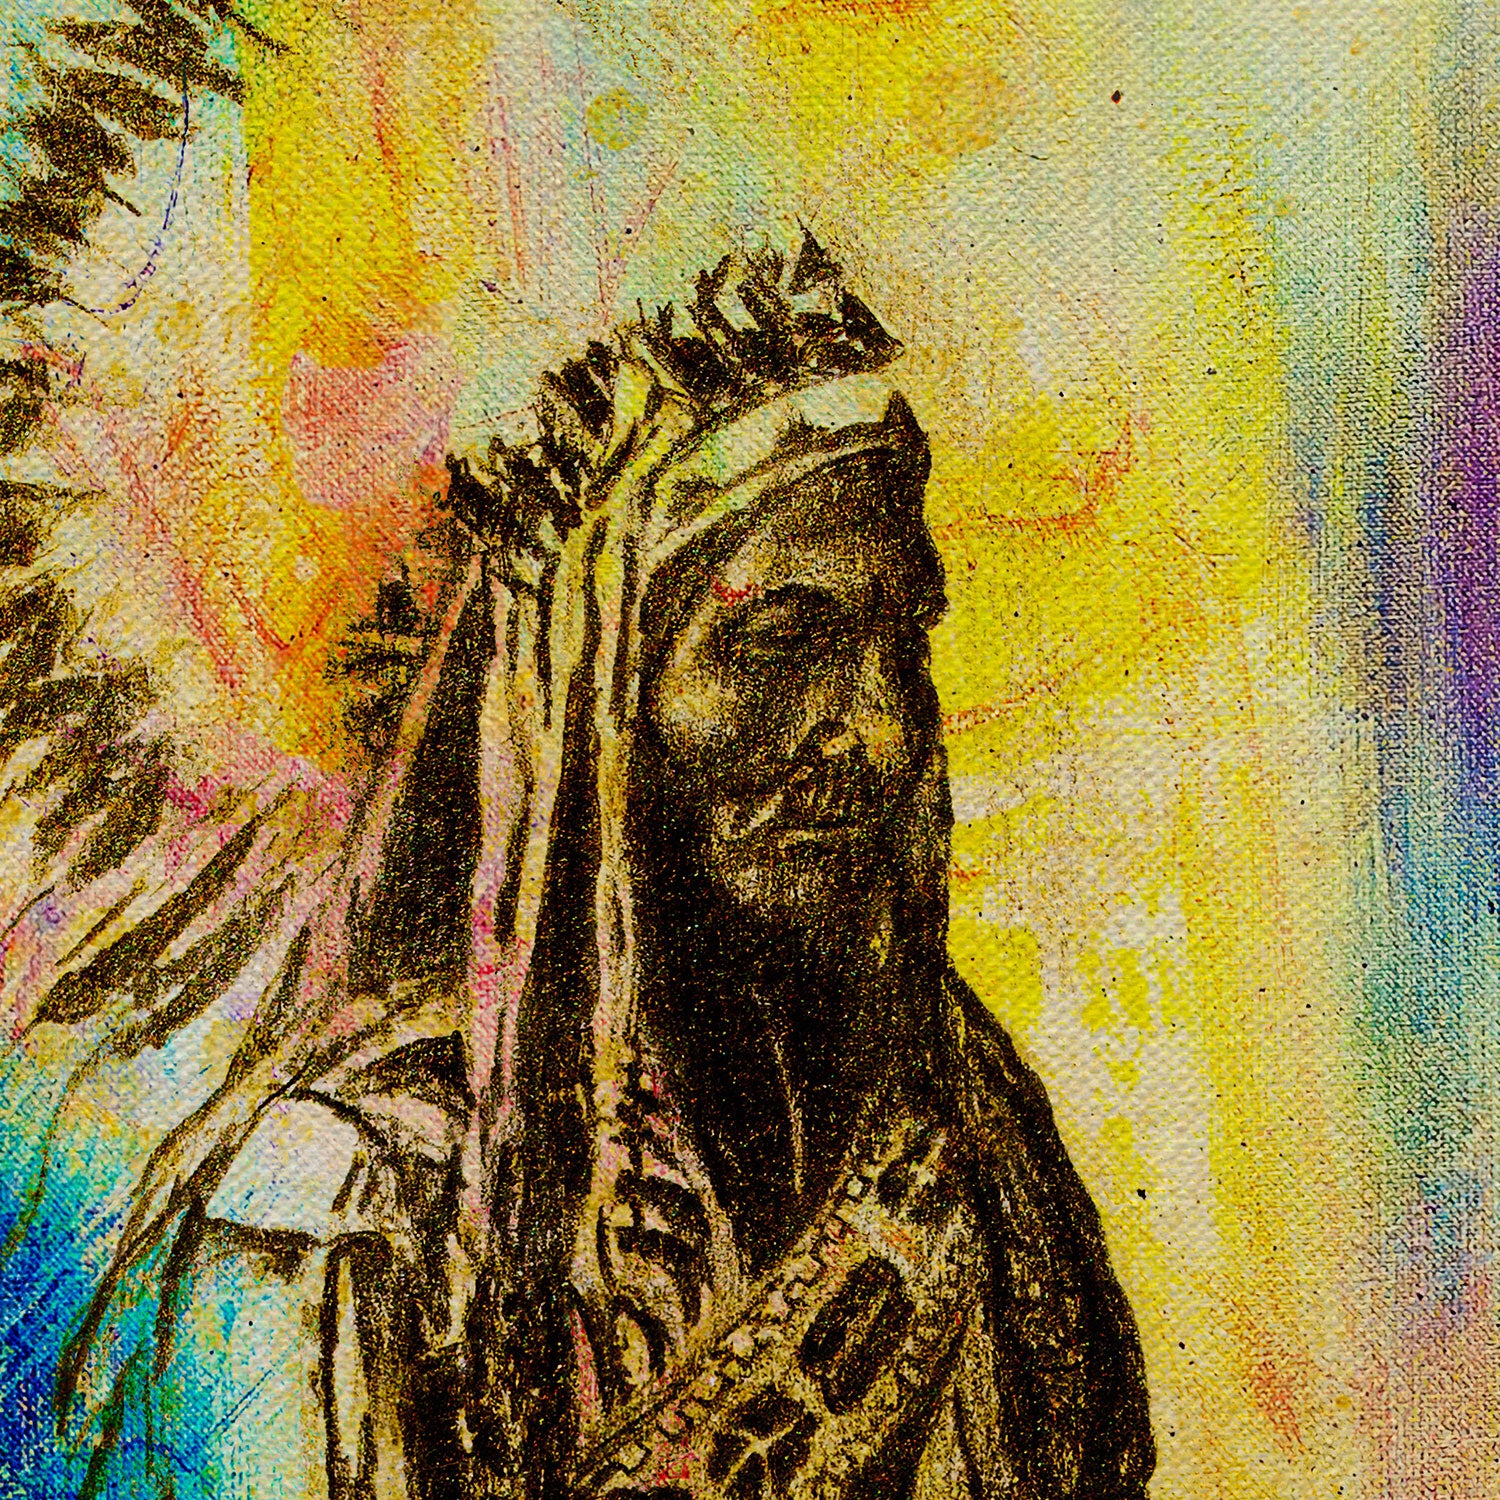 Native American Chief Abstract Canvas Wall Art